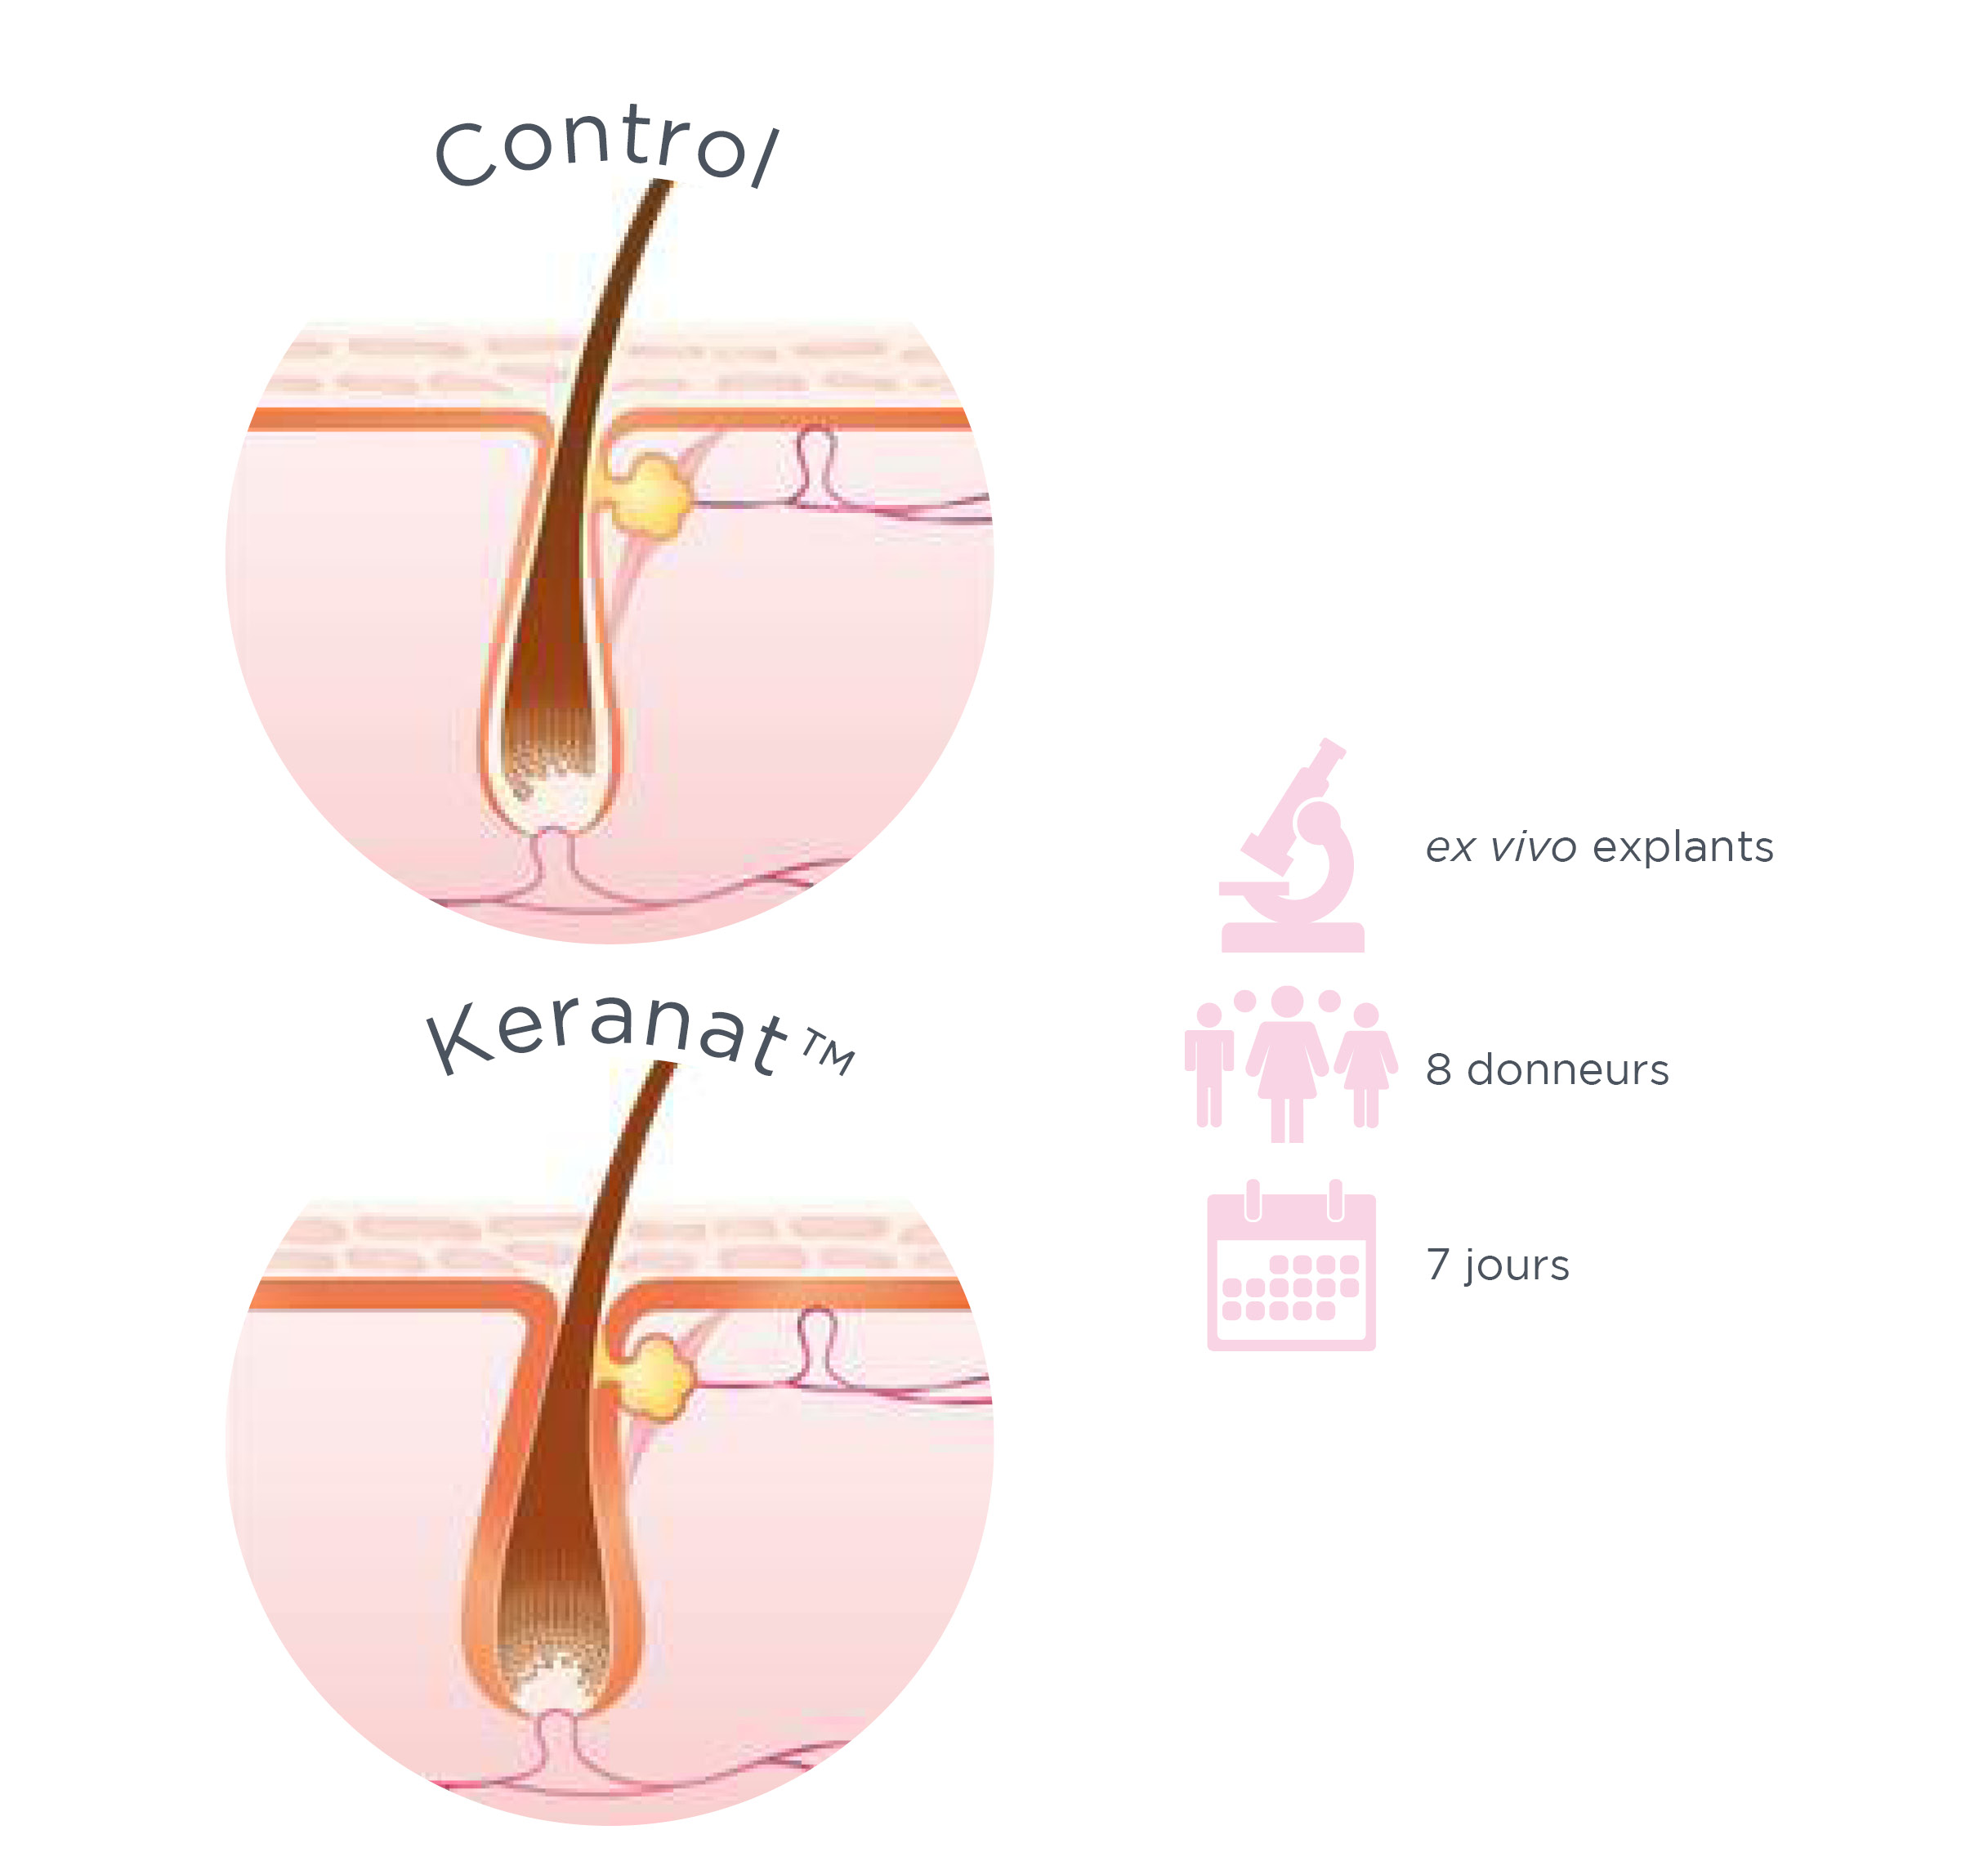 Illustrations of a hair anchor with the effectiveness of the Keranat™ product.